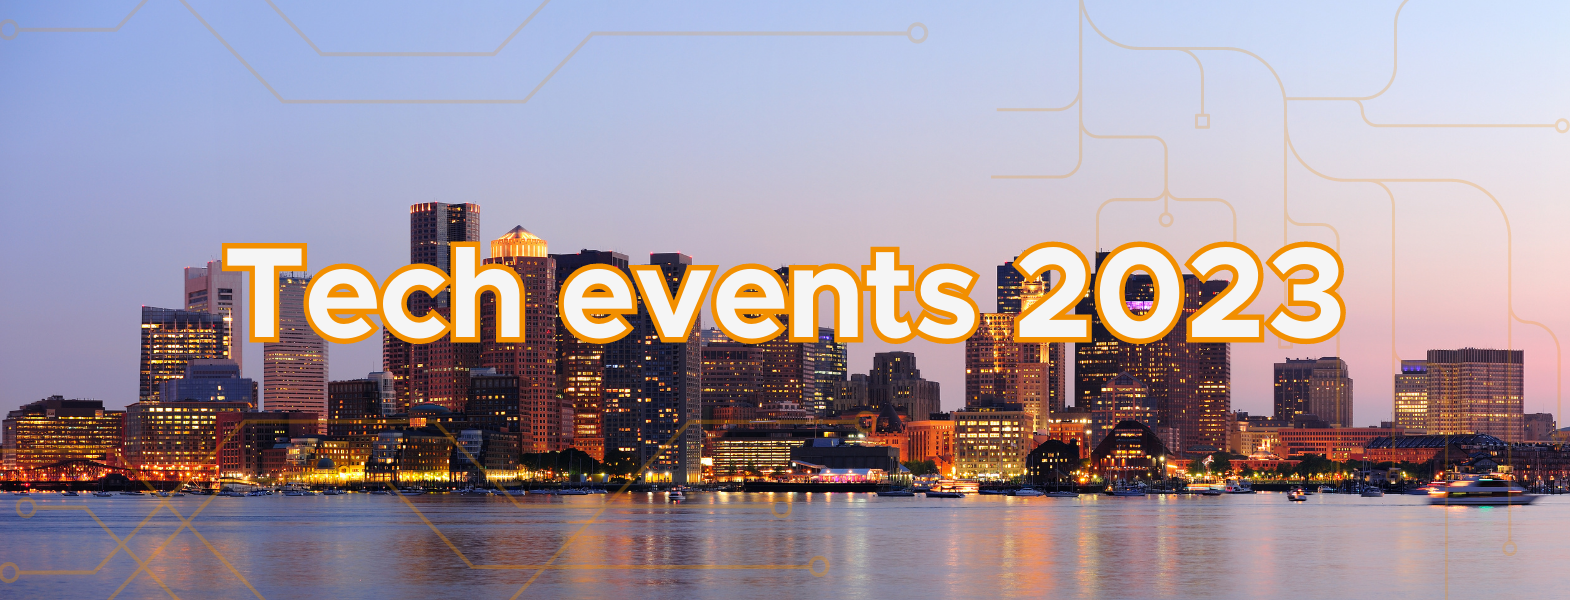 Boston’s Most Exciting Tech Events in 2023